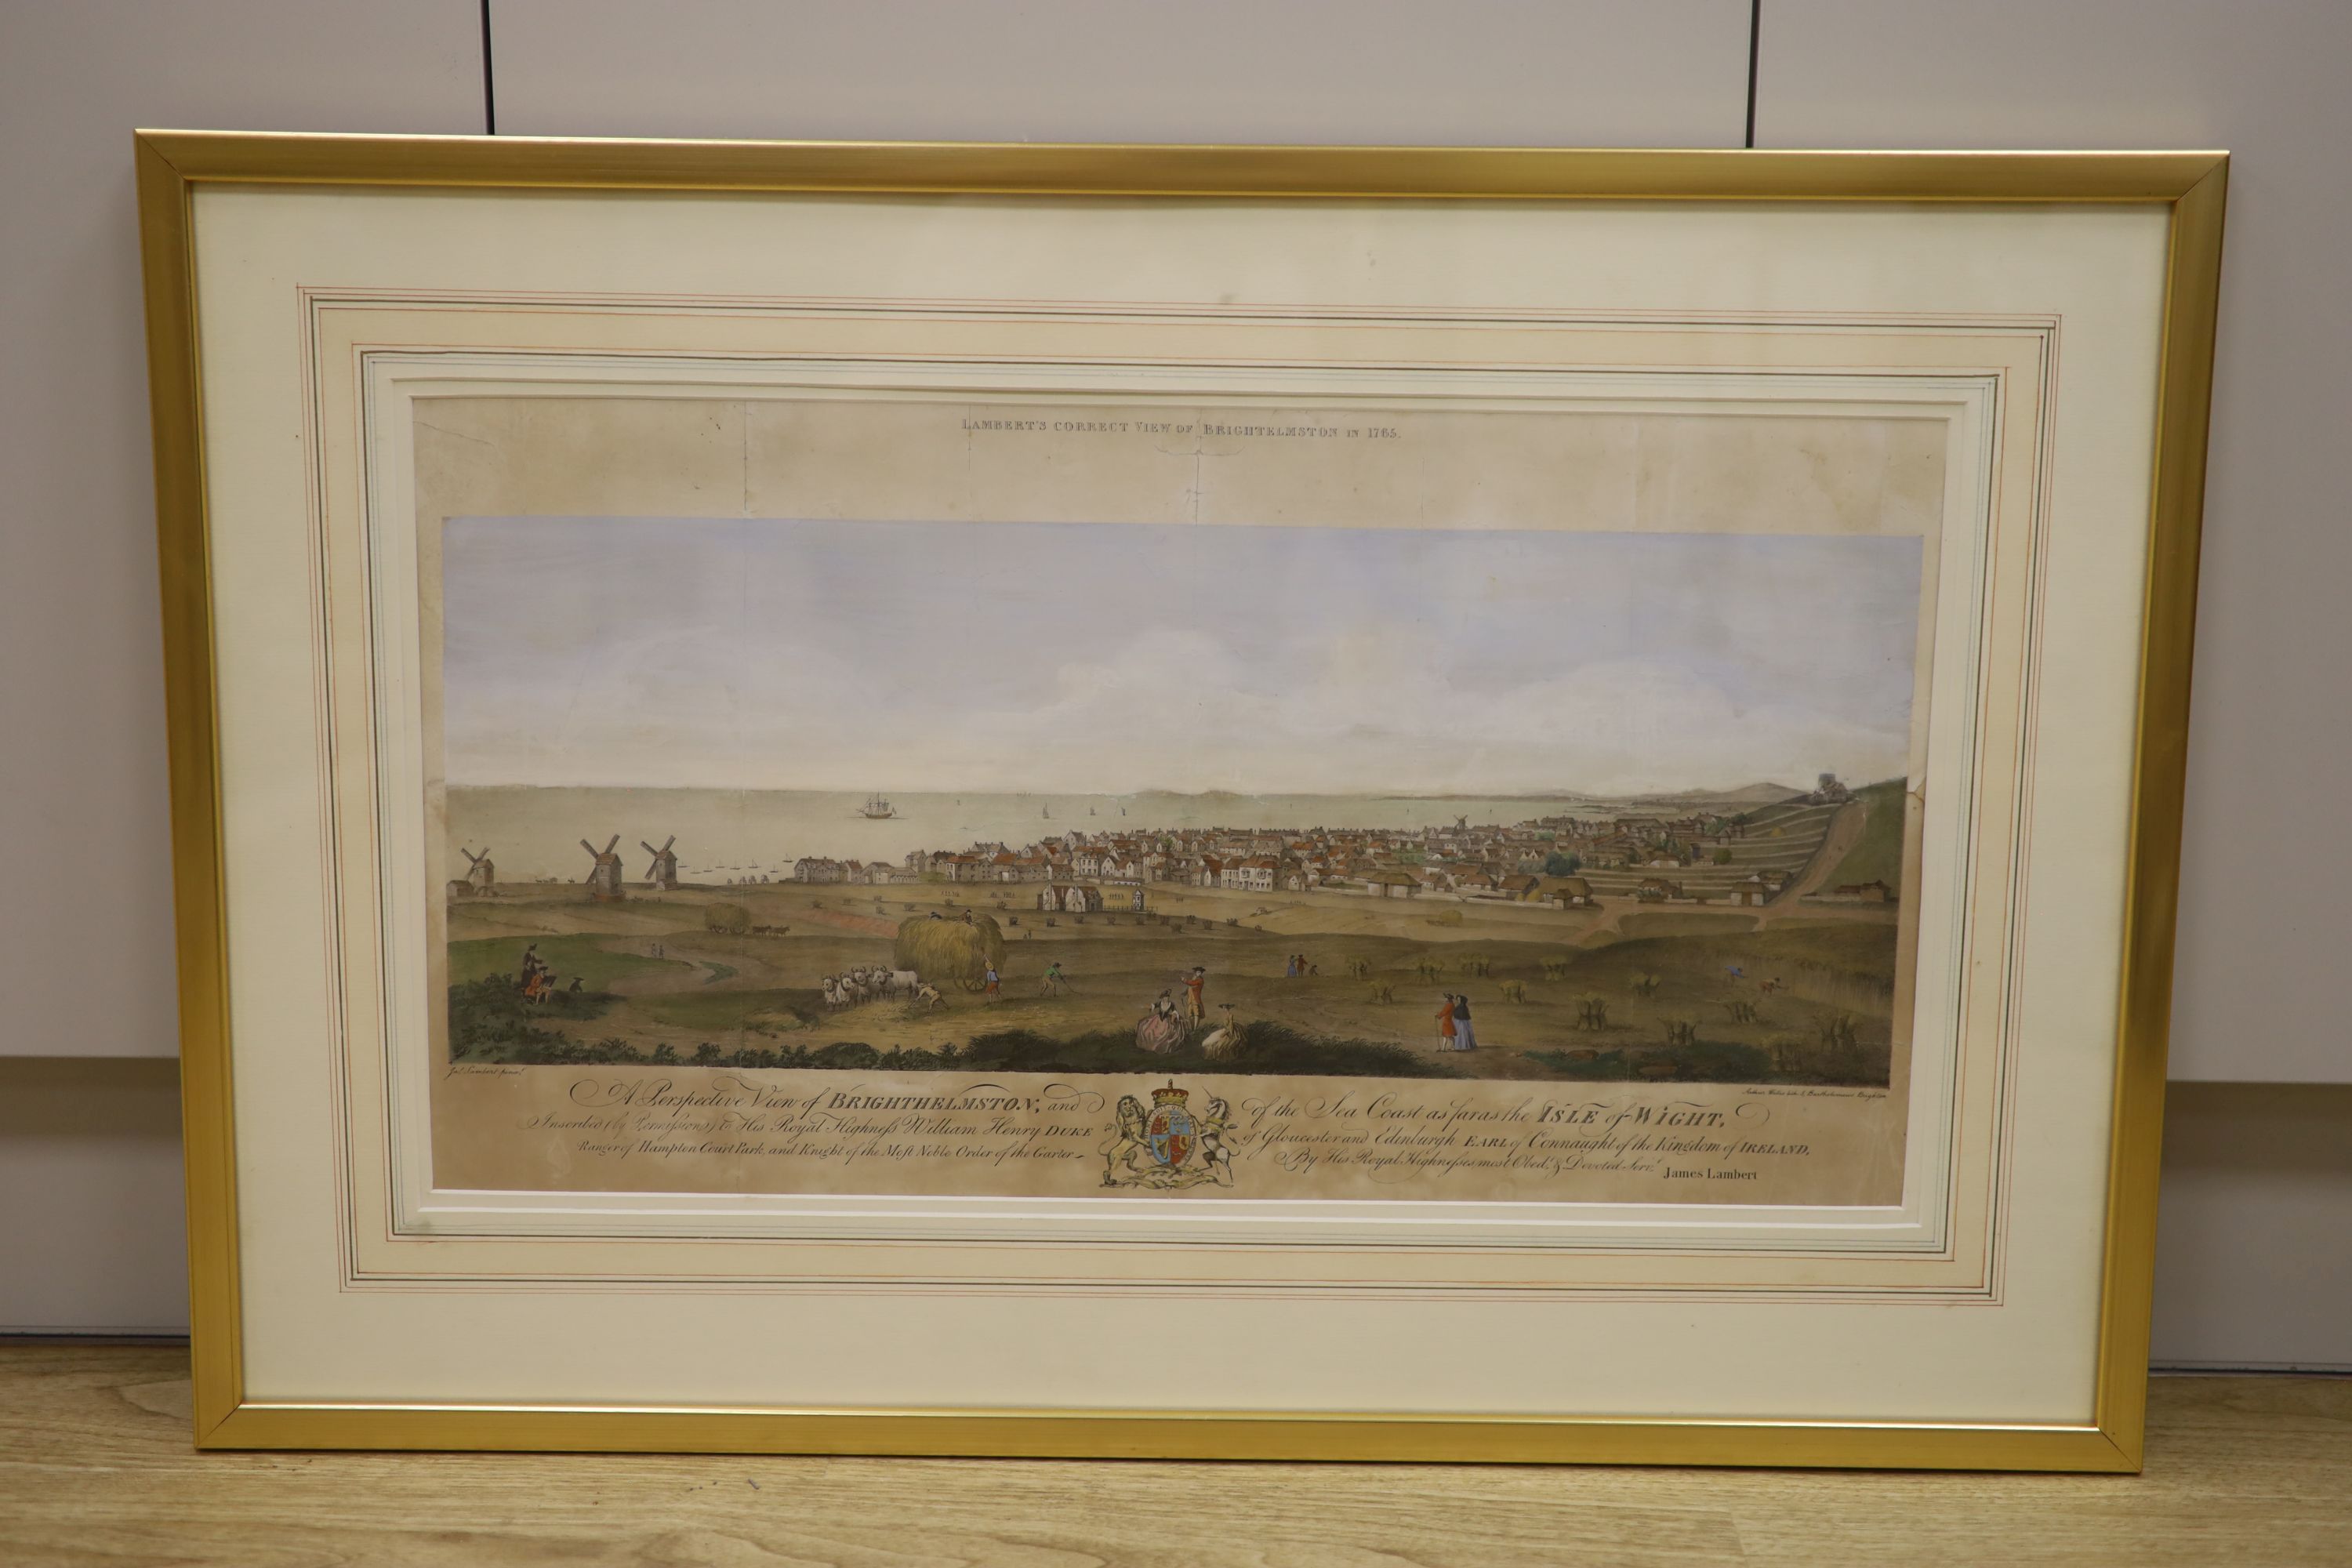 After James Lambert (1725-1788), coloured lithograph, A Perspective View of Brighthelmston, and of the Sea Coast as far as the Isle of